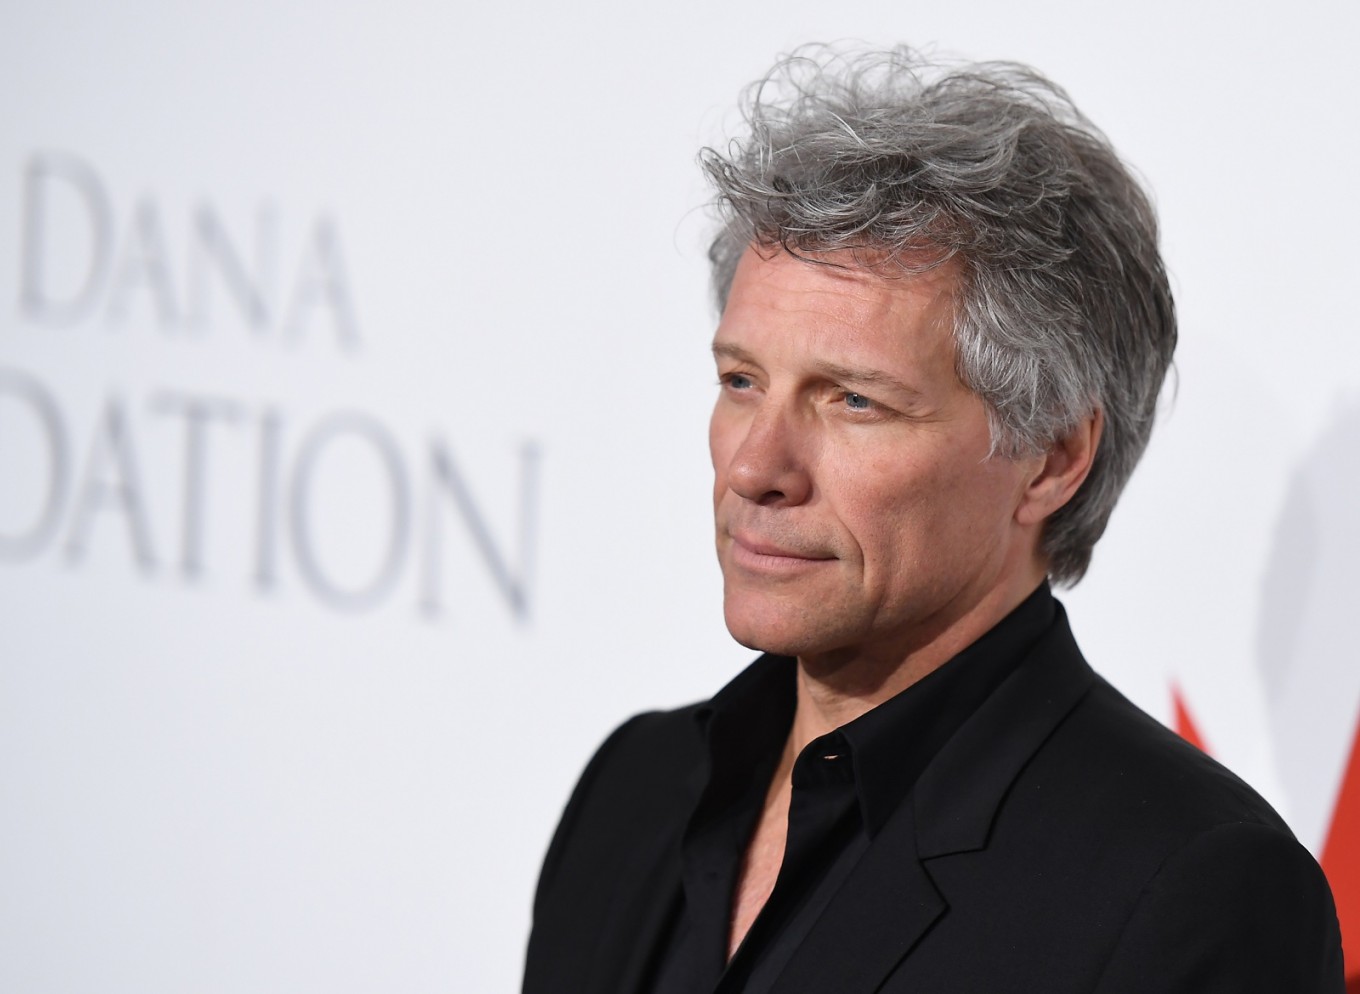 Jon Bon Jovi collaborates with fans for new song about coronavirus